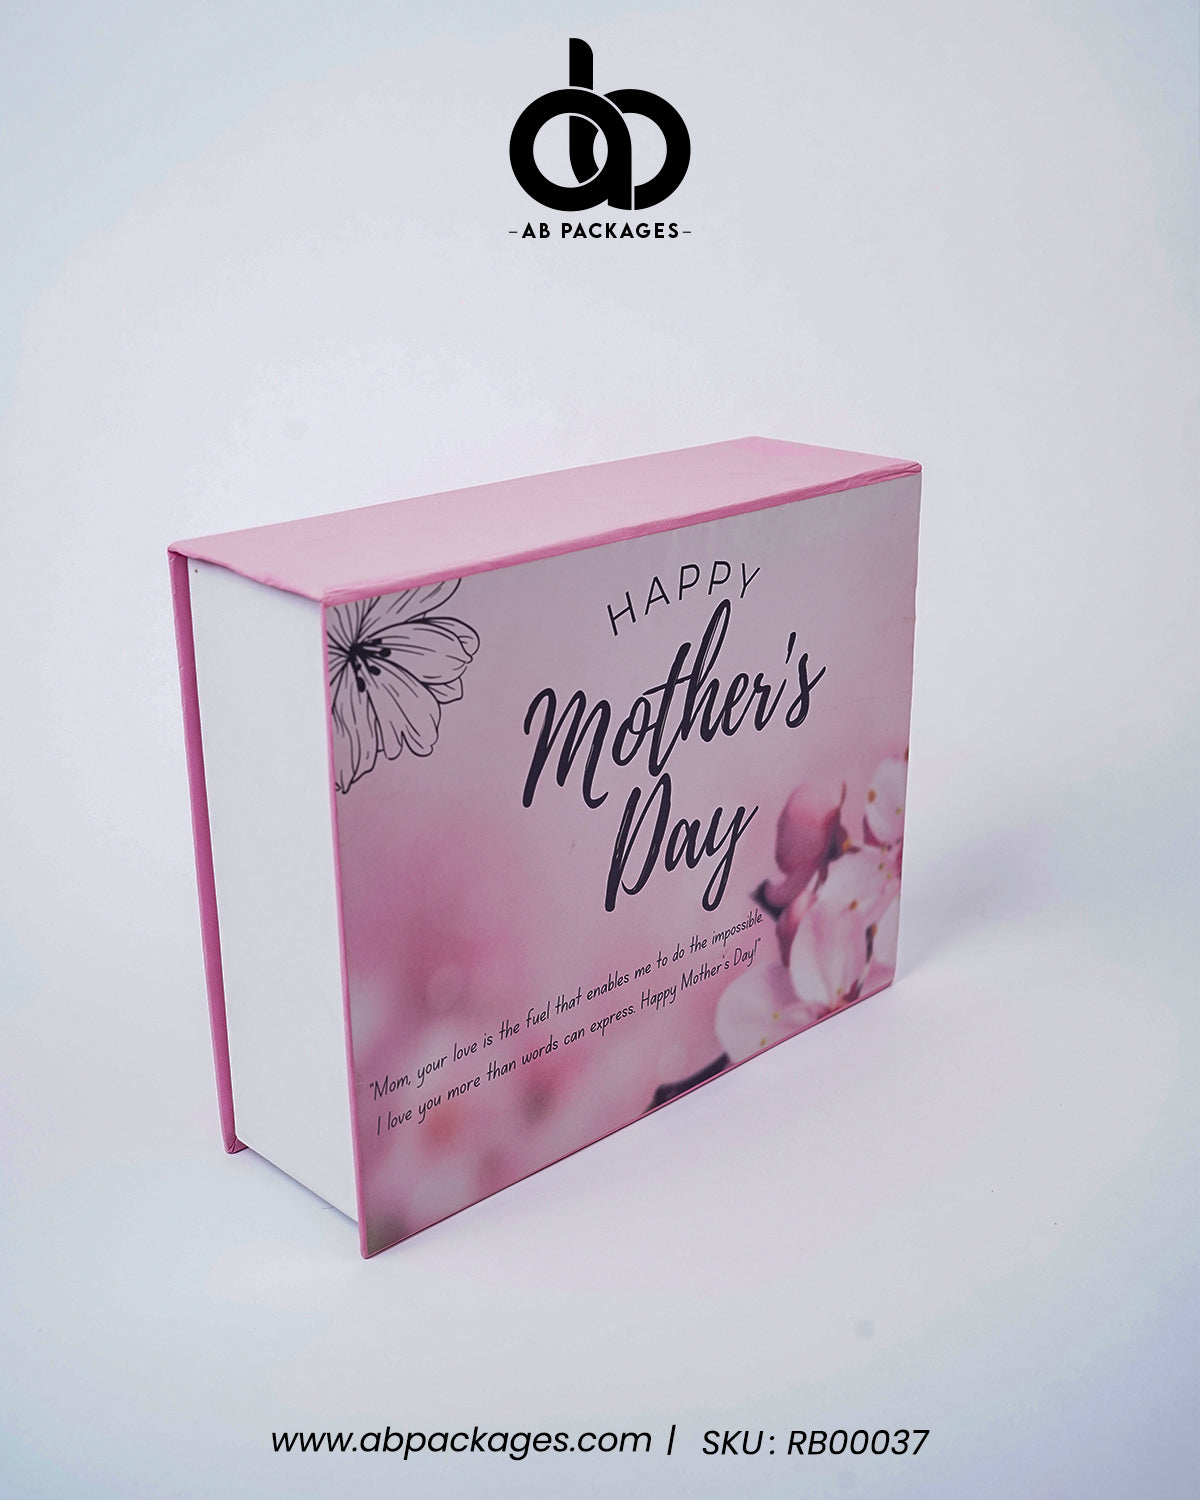 Palette of Affection: A Mother's day special